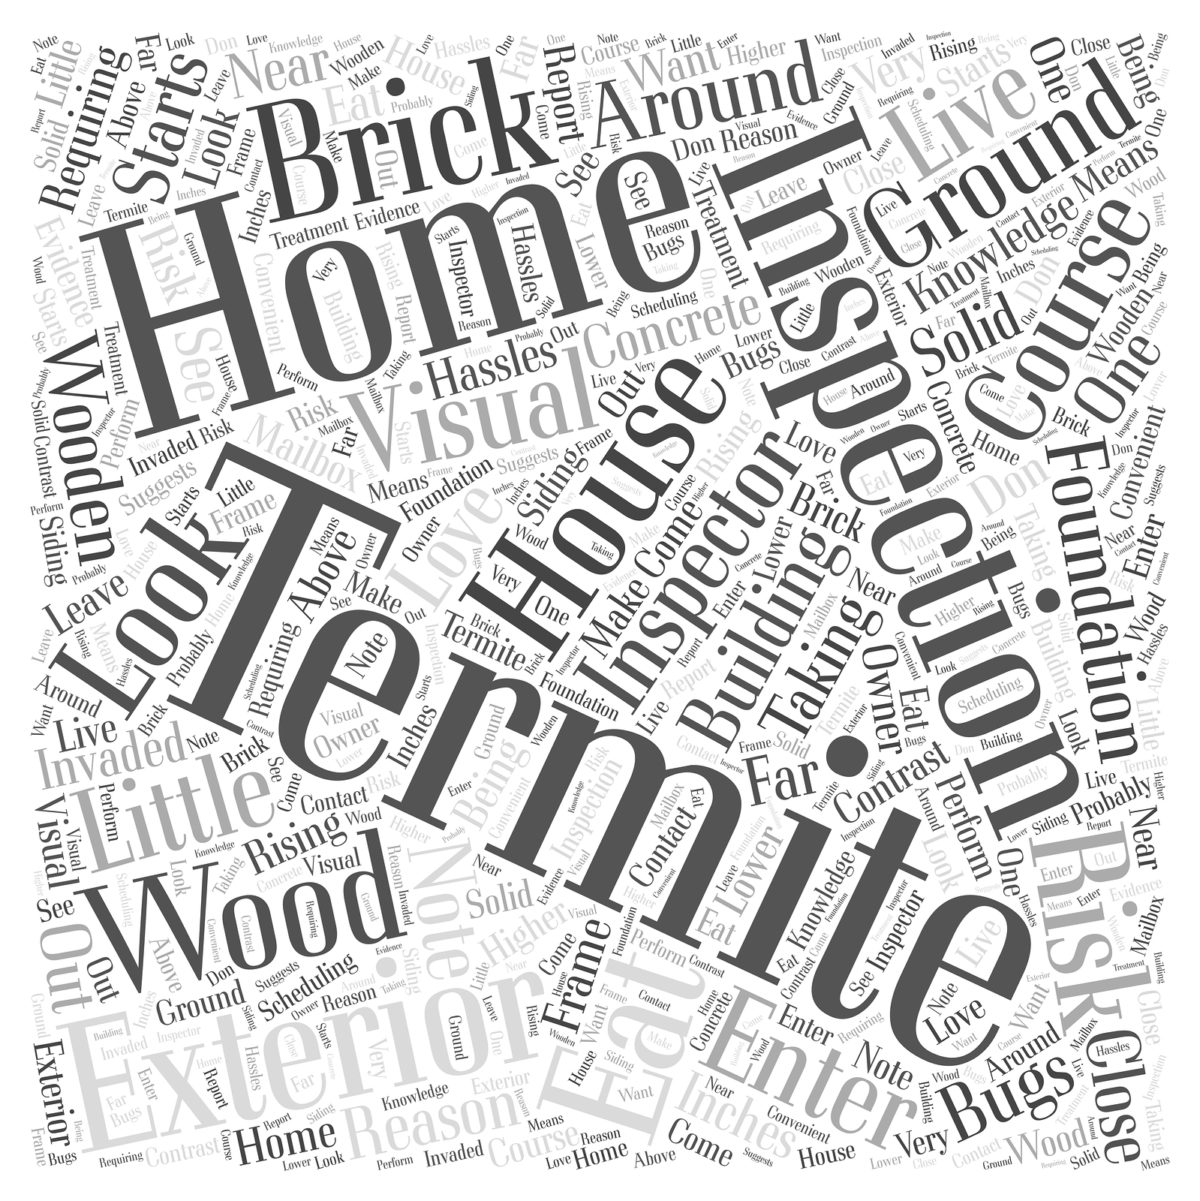 Who Pays for Termite Inspections in FHA Loans?